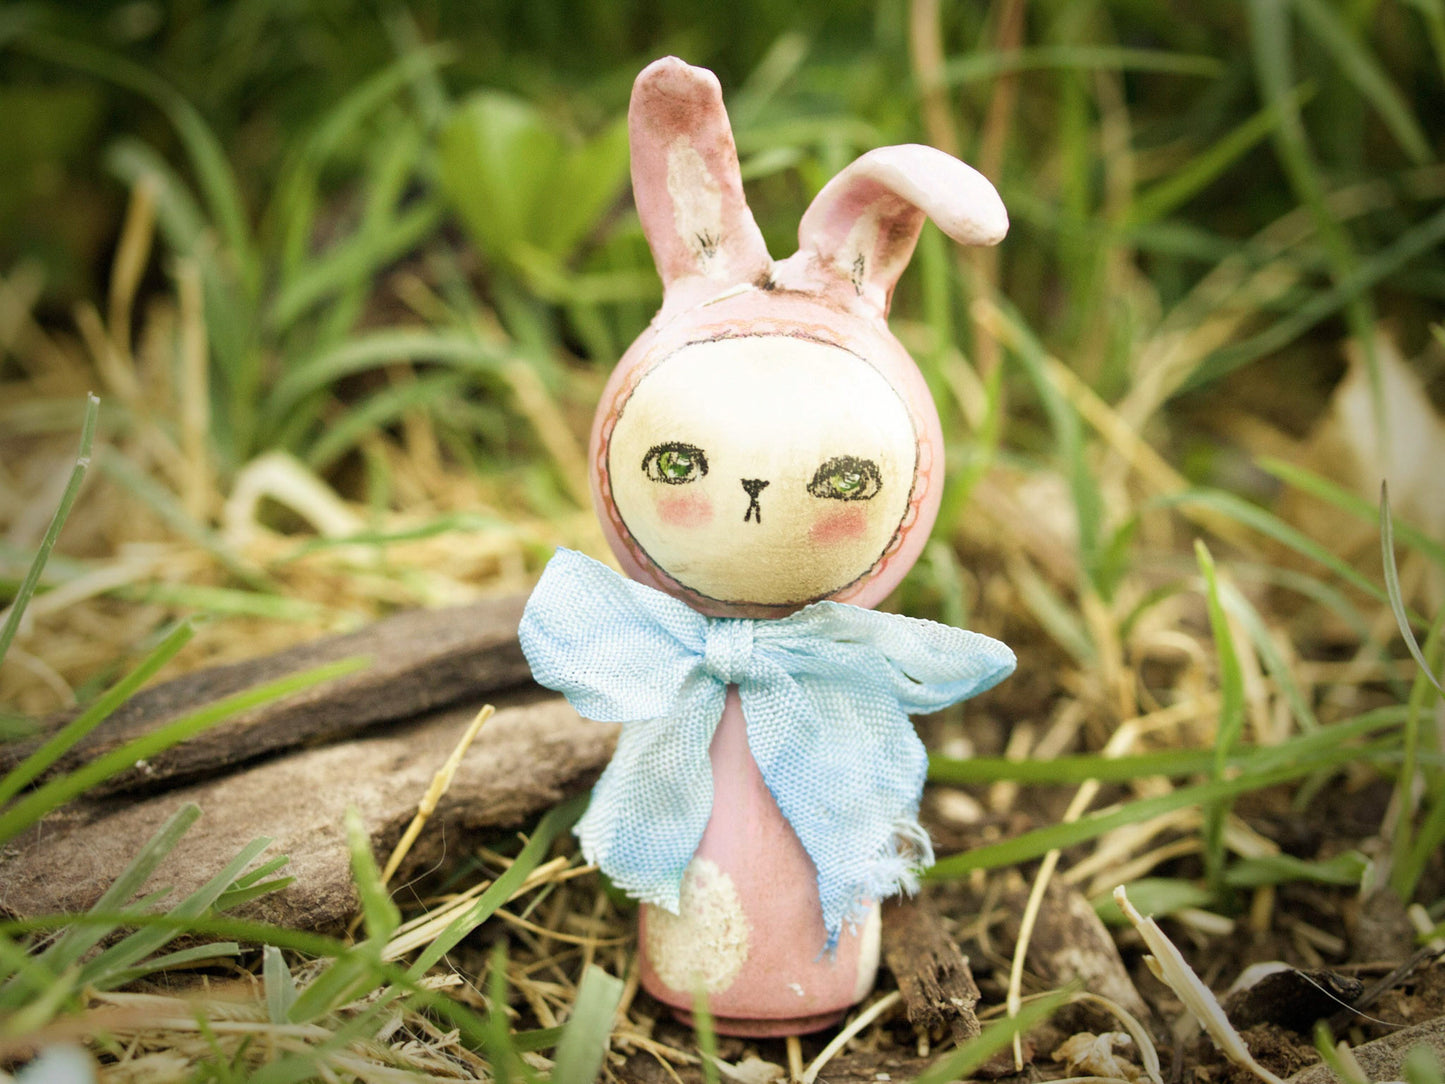 Spring has finally arrived to Danita Art, and to celebrate, I created a collection of miniature wood kokeshi art doll Easter bunny rabbits.